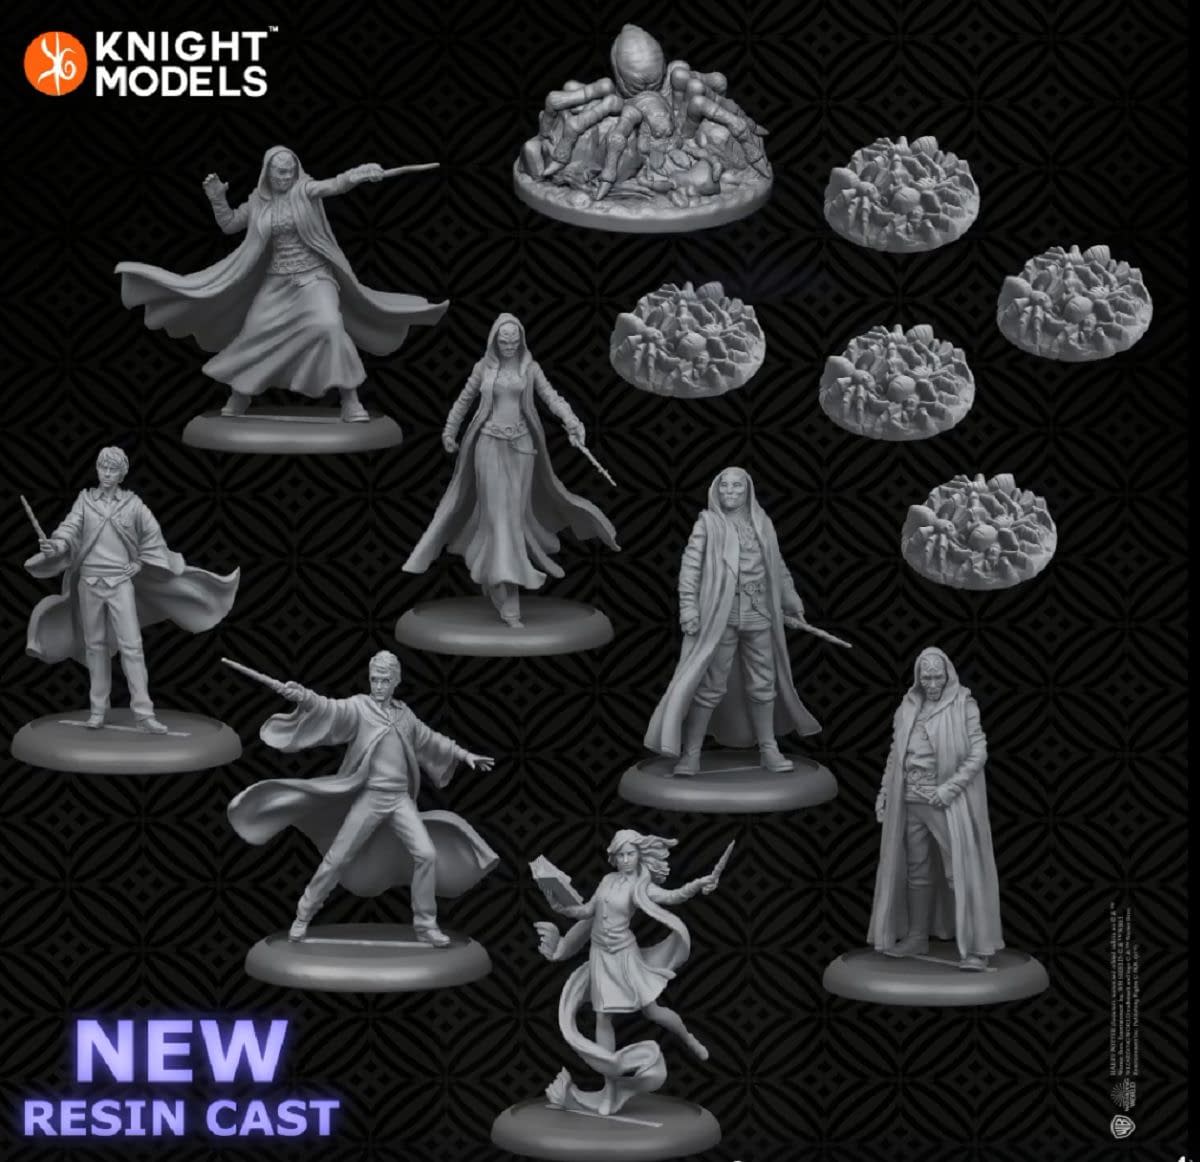 Knight Models Announces 2nd Edition of "Harry Potter" Miniatures Game